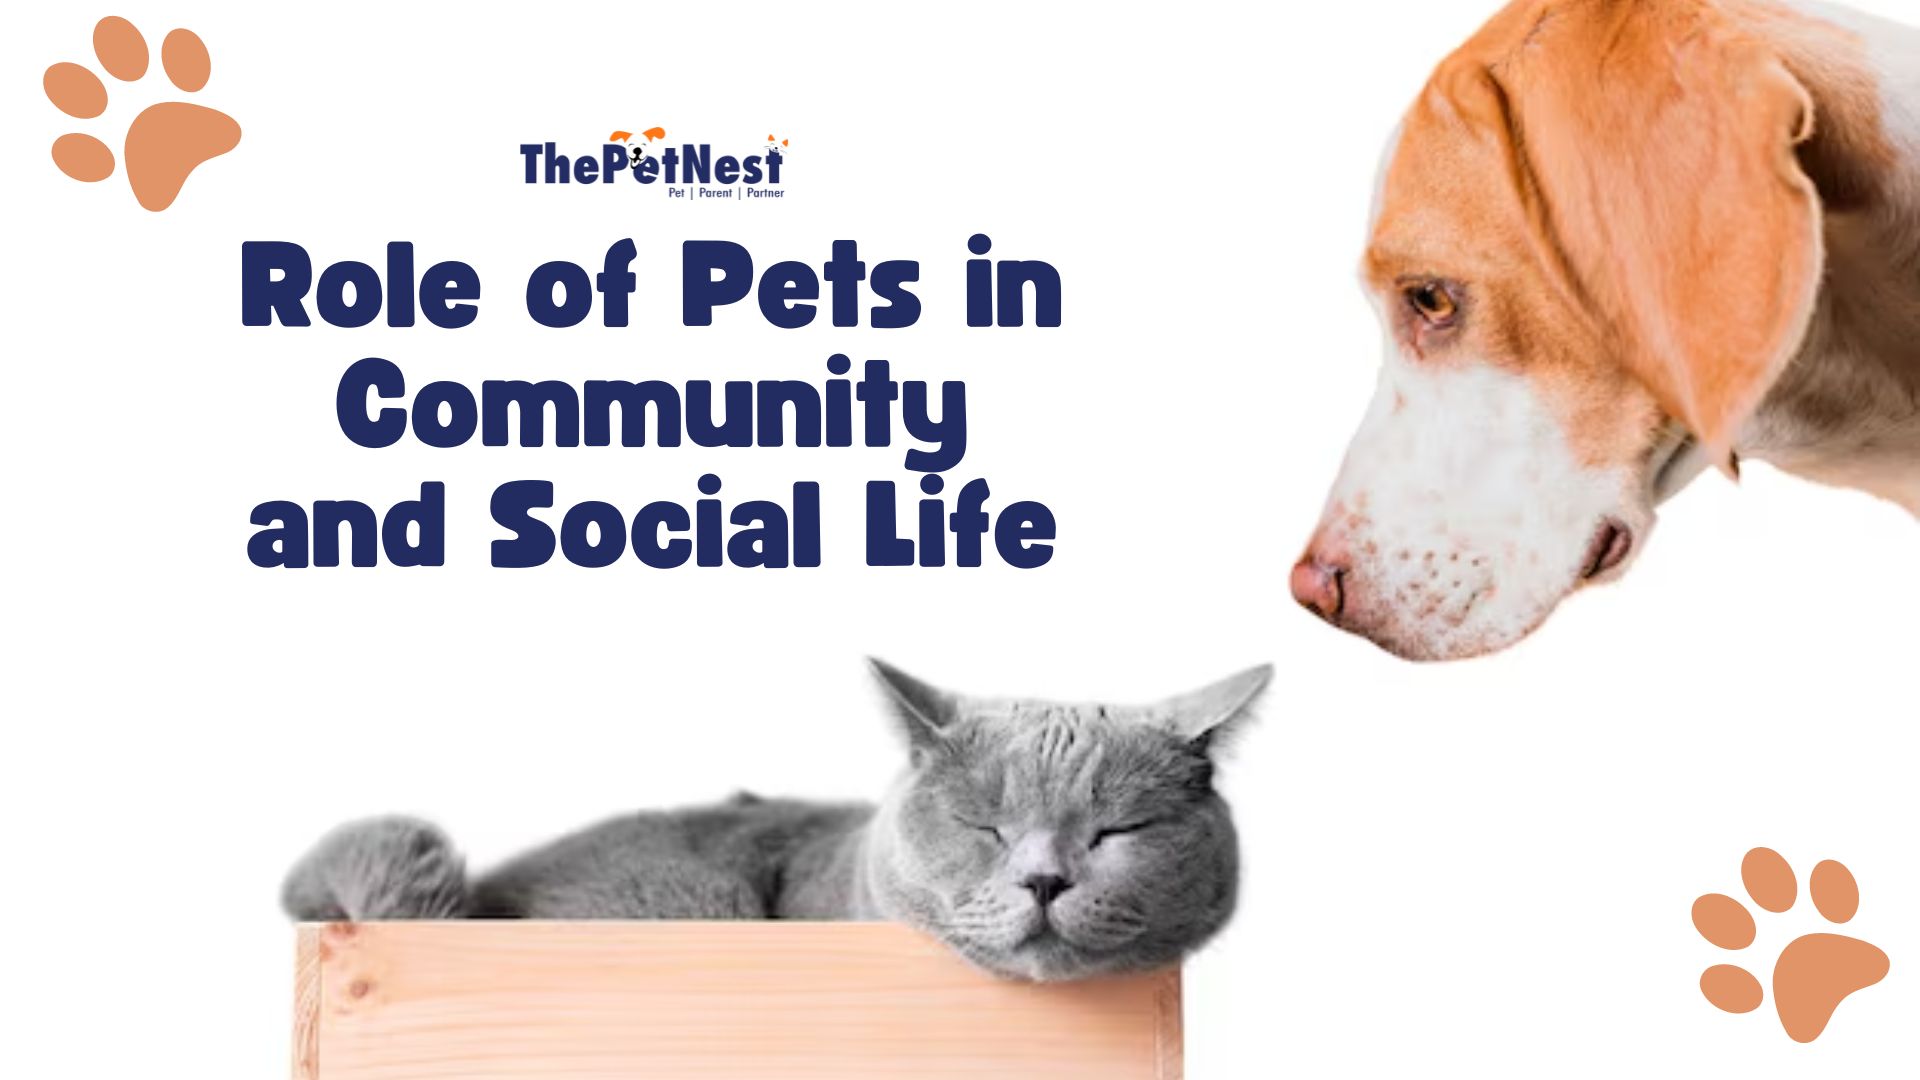 Role of Pets in Community and Social Life